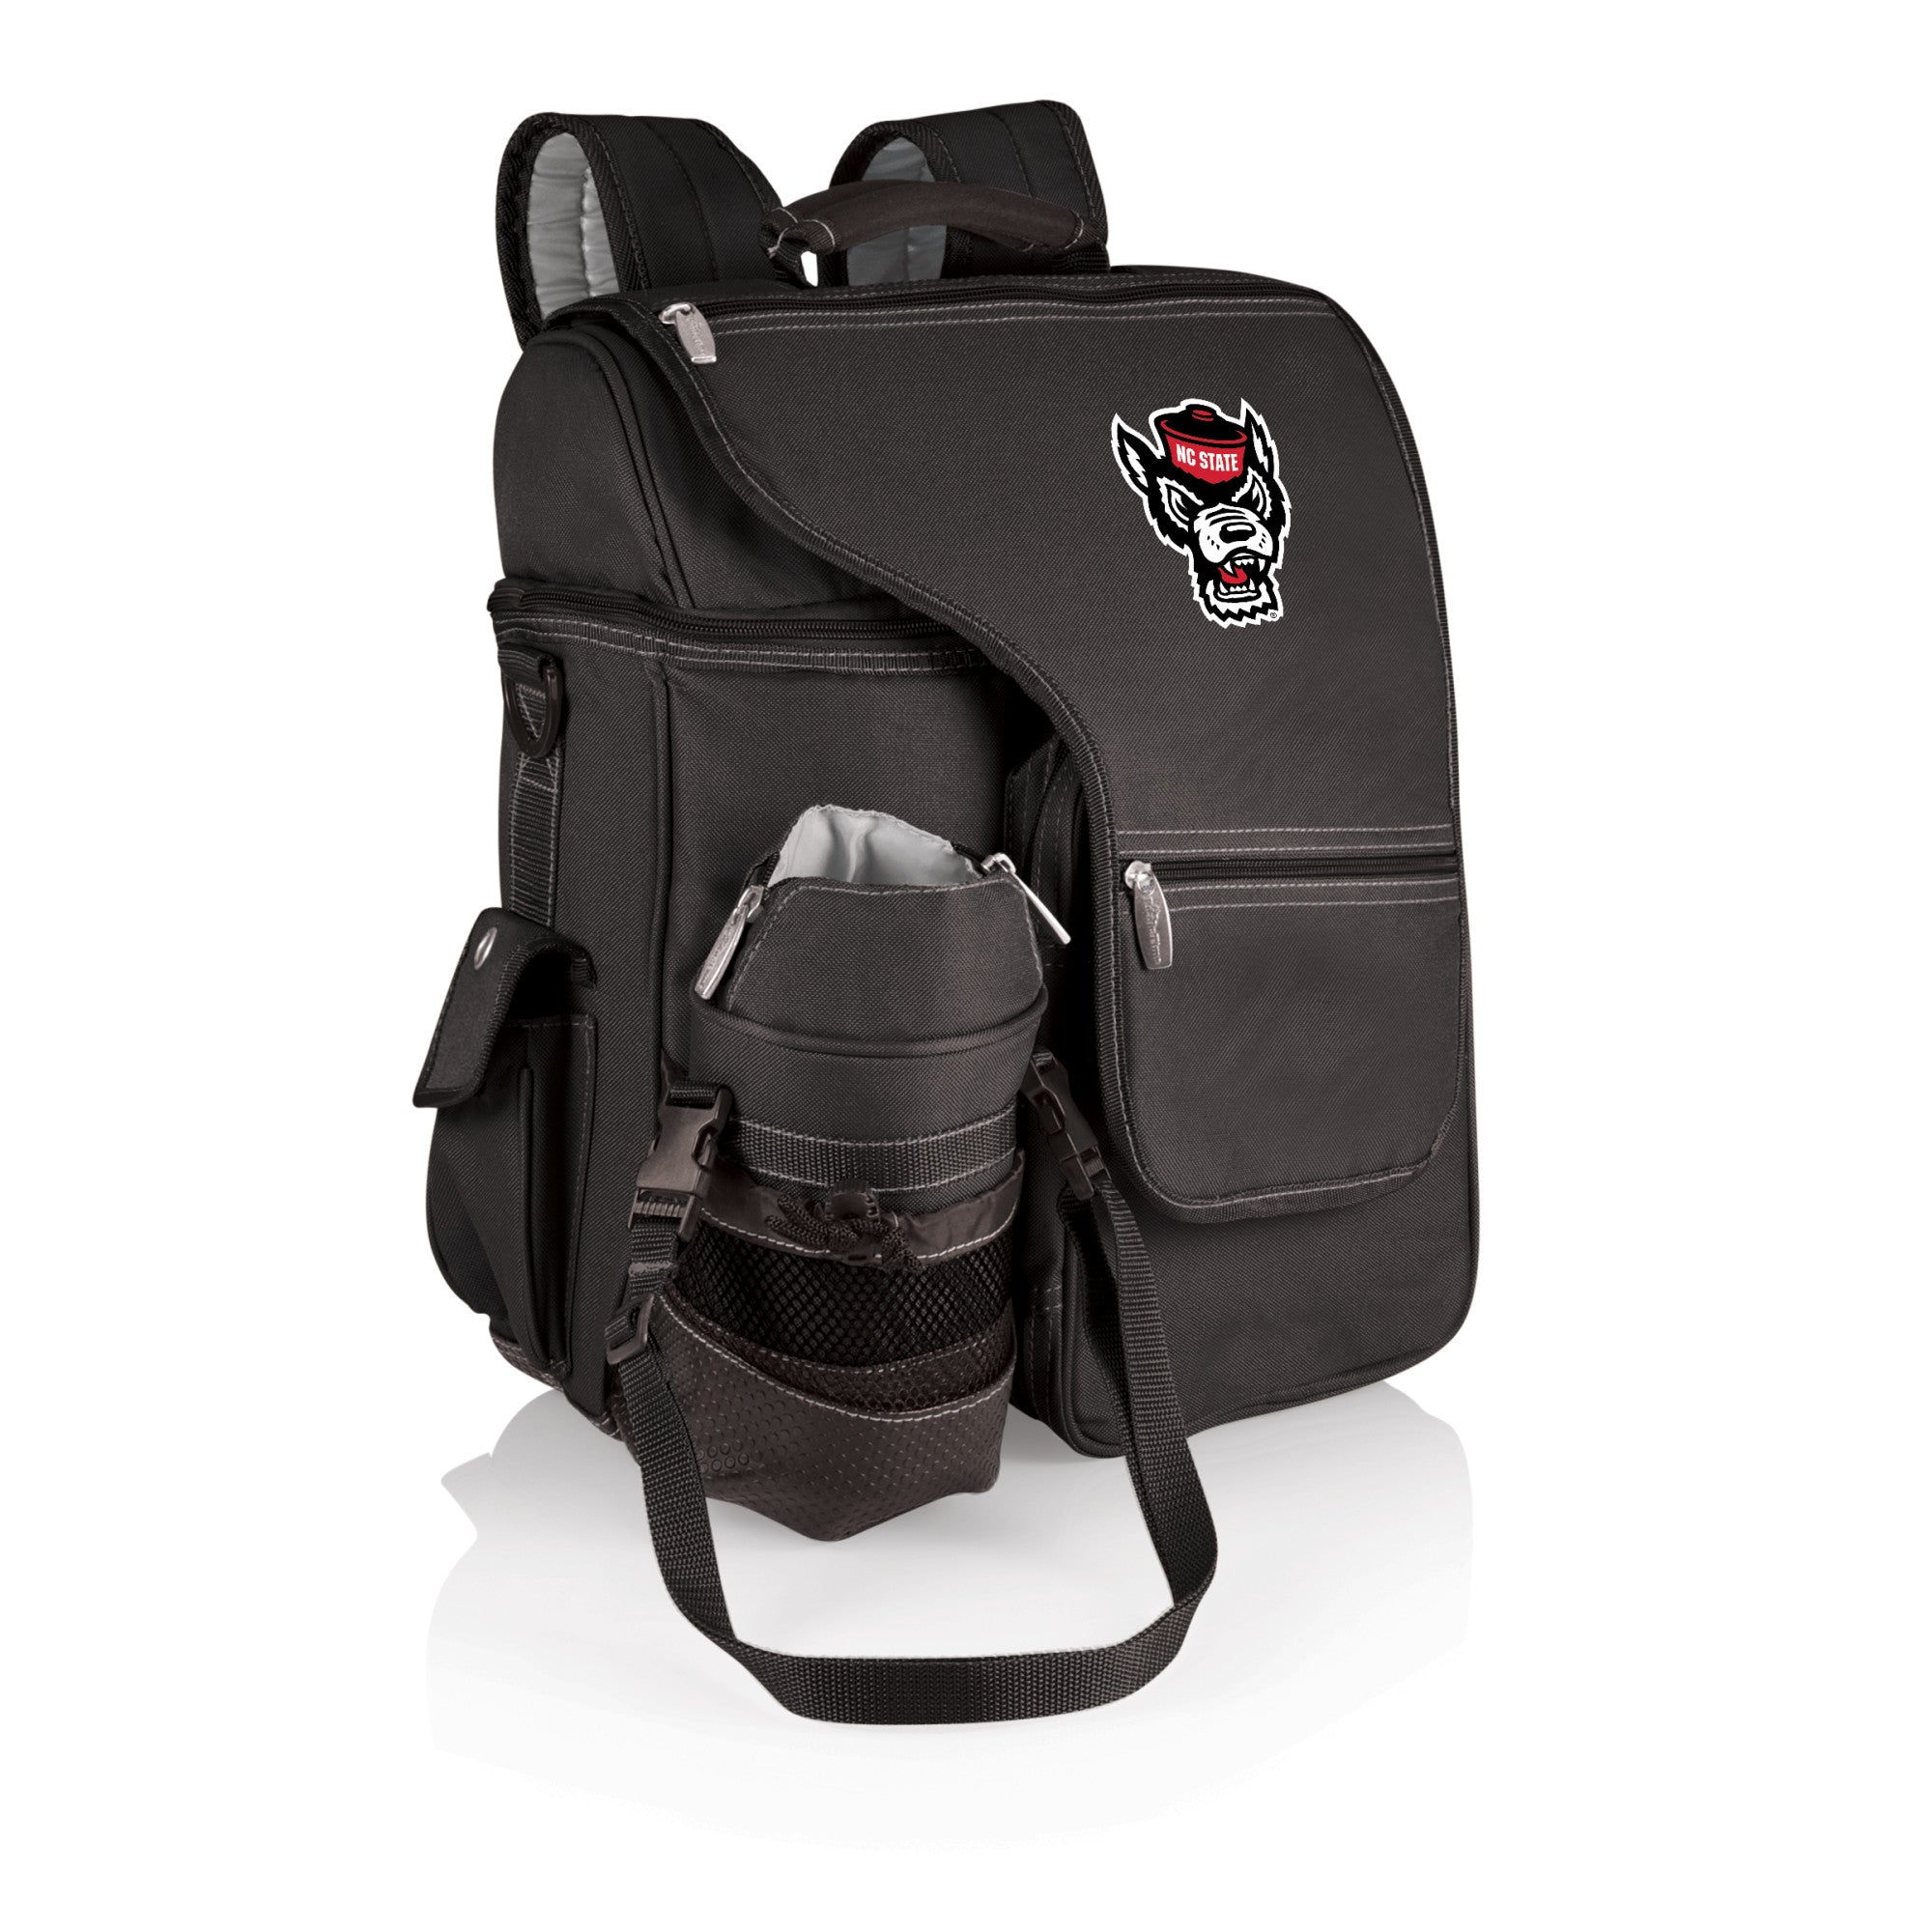 NC State Wolfpack - Turismo Travel Backpack Cooler